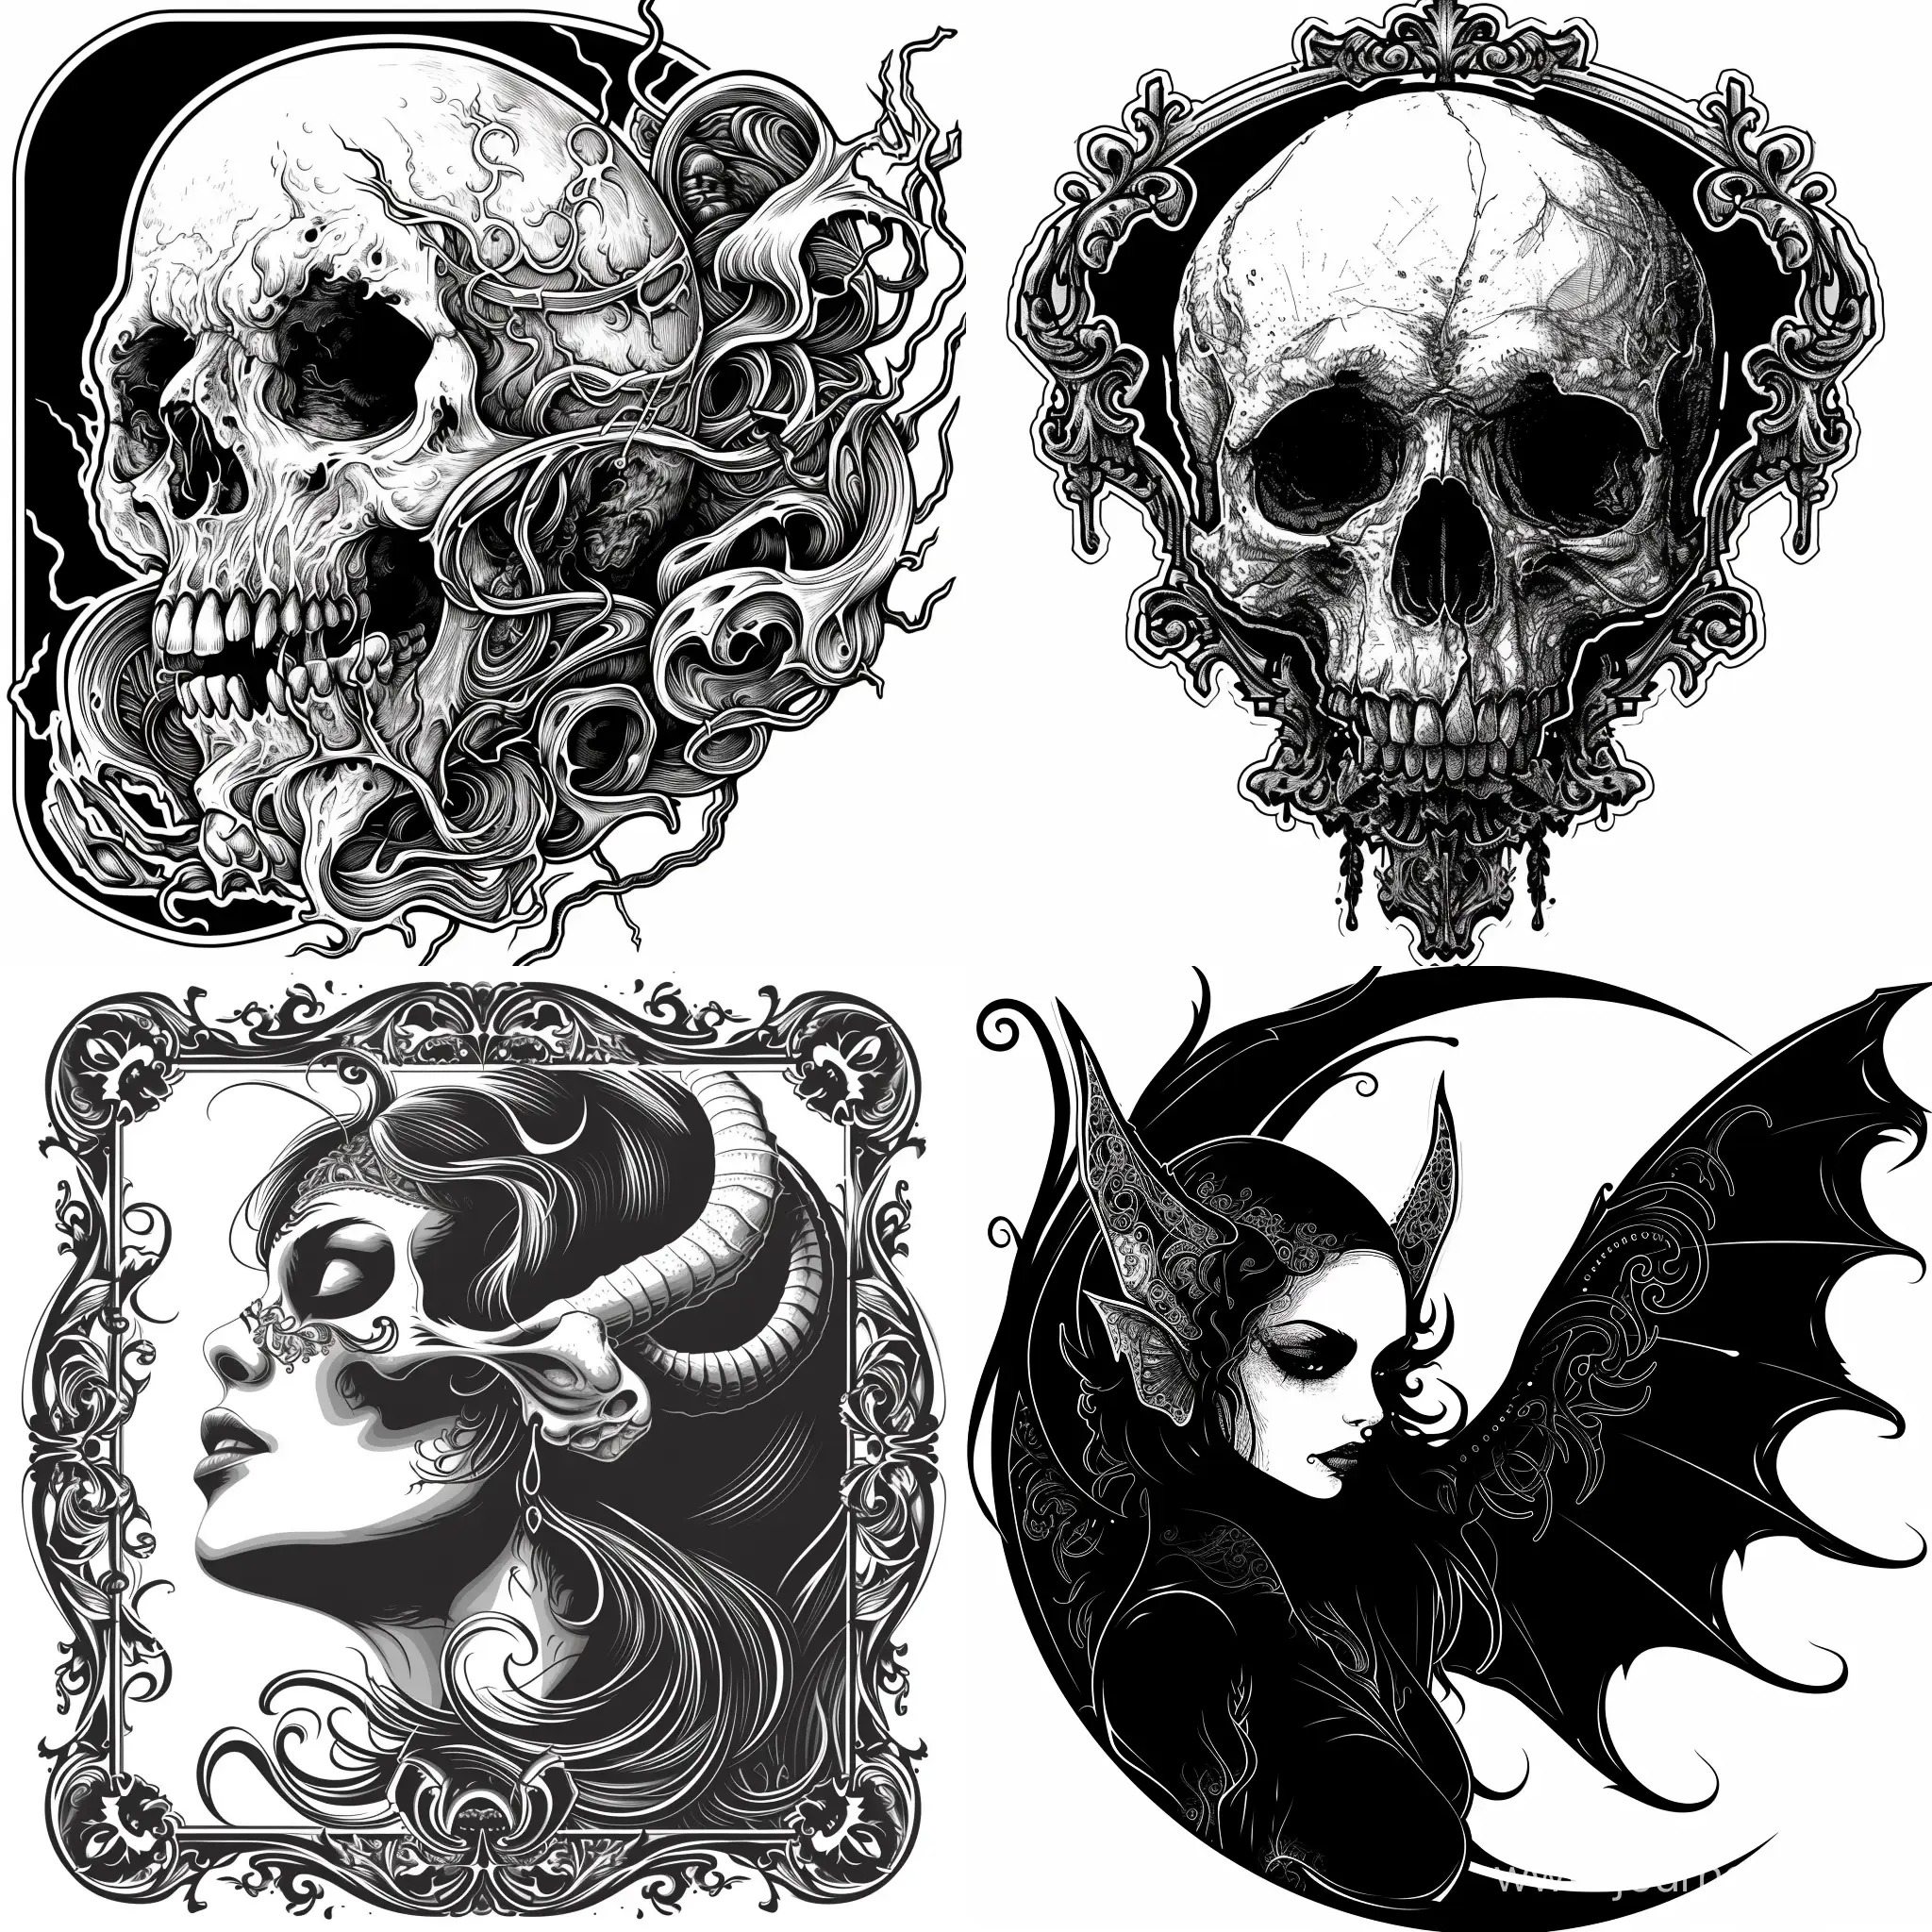 Detailed-Gothic-Sticker-in-Black-and-White-Vector-Art-on-White-Background